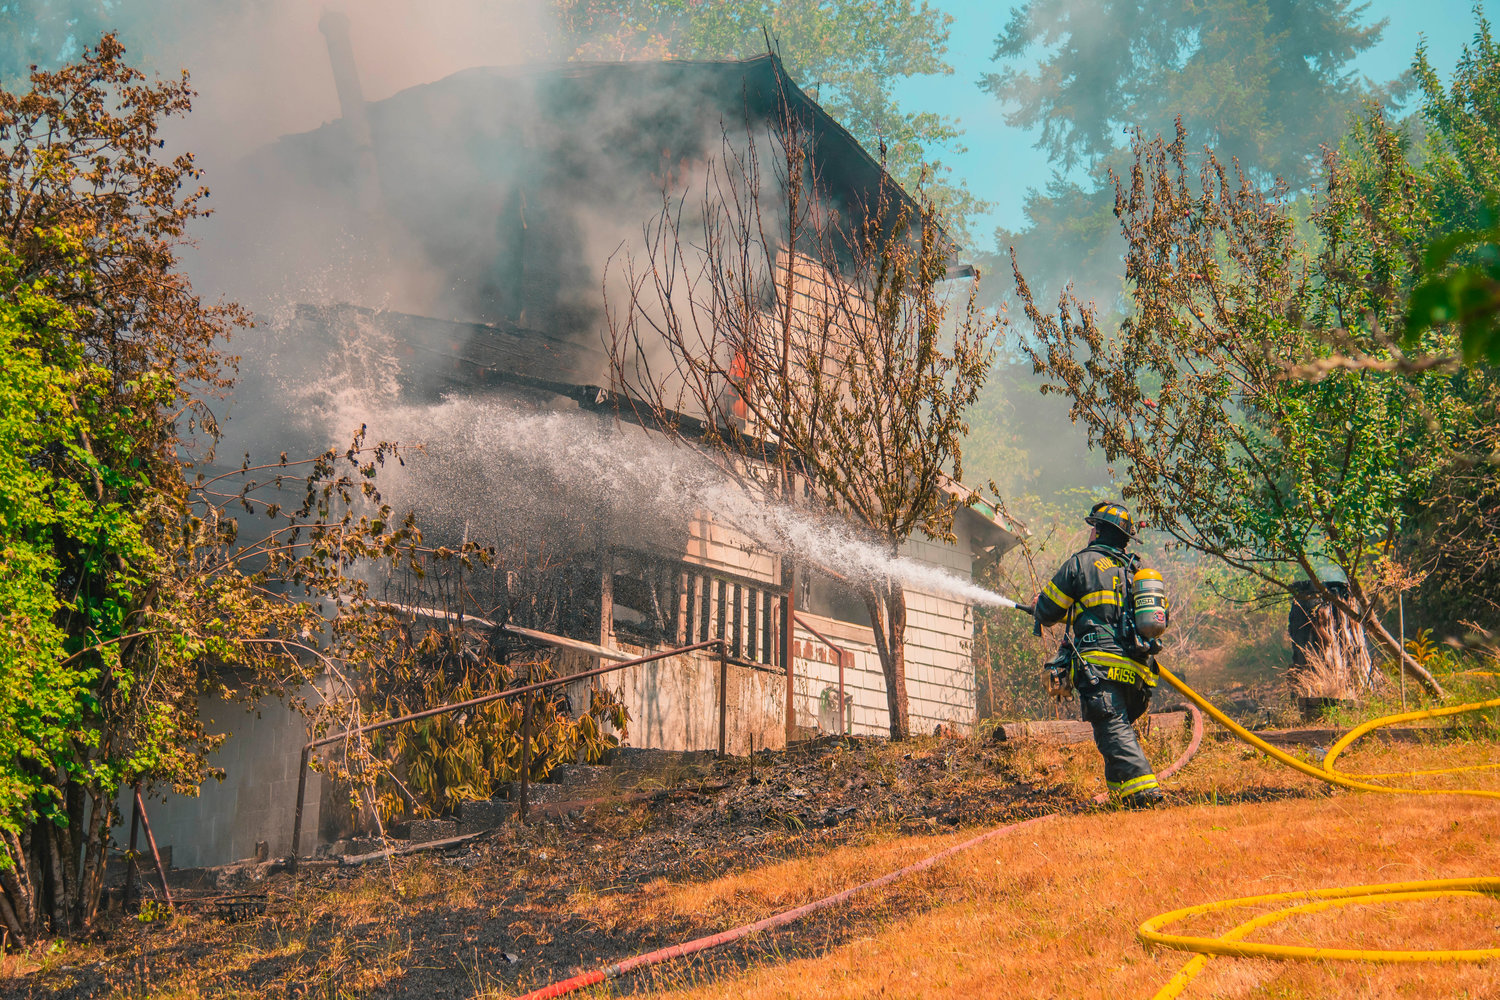 A Riverside Fire Authority firefighter uses a hose to put out flames at a residential structure in Centralia on Thursday.